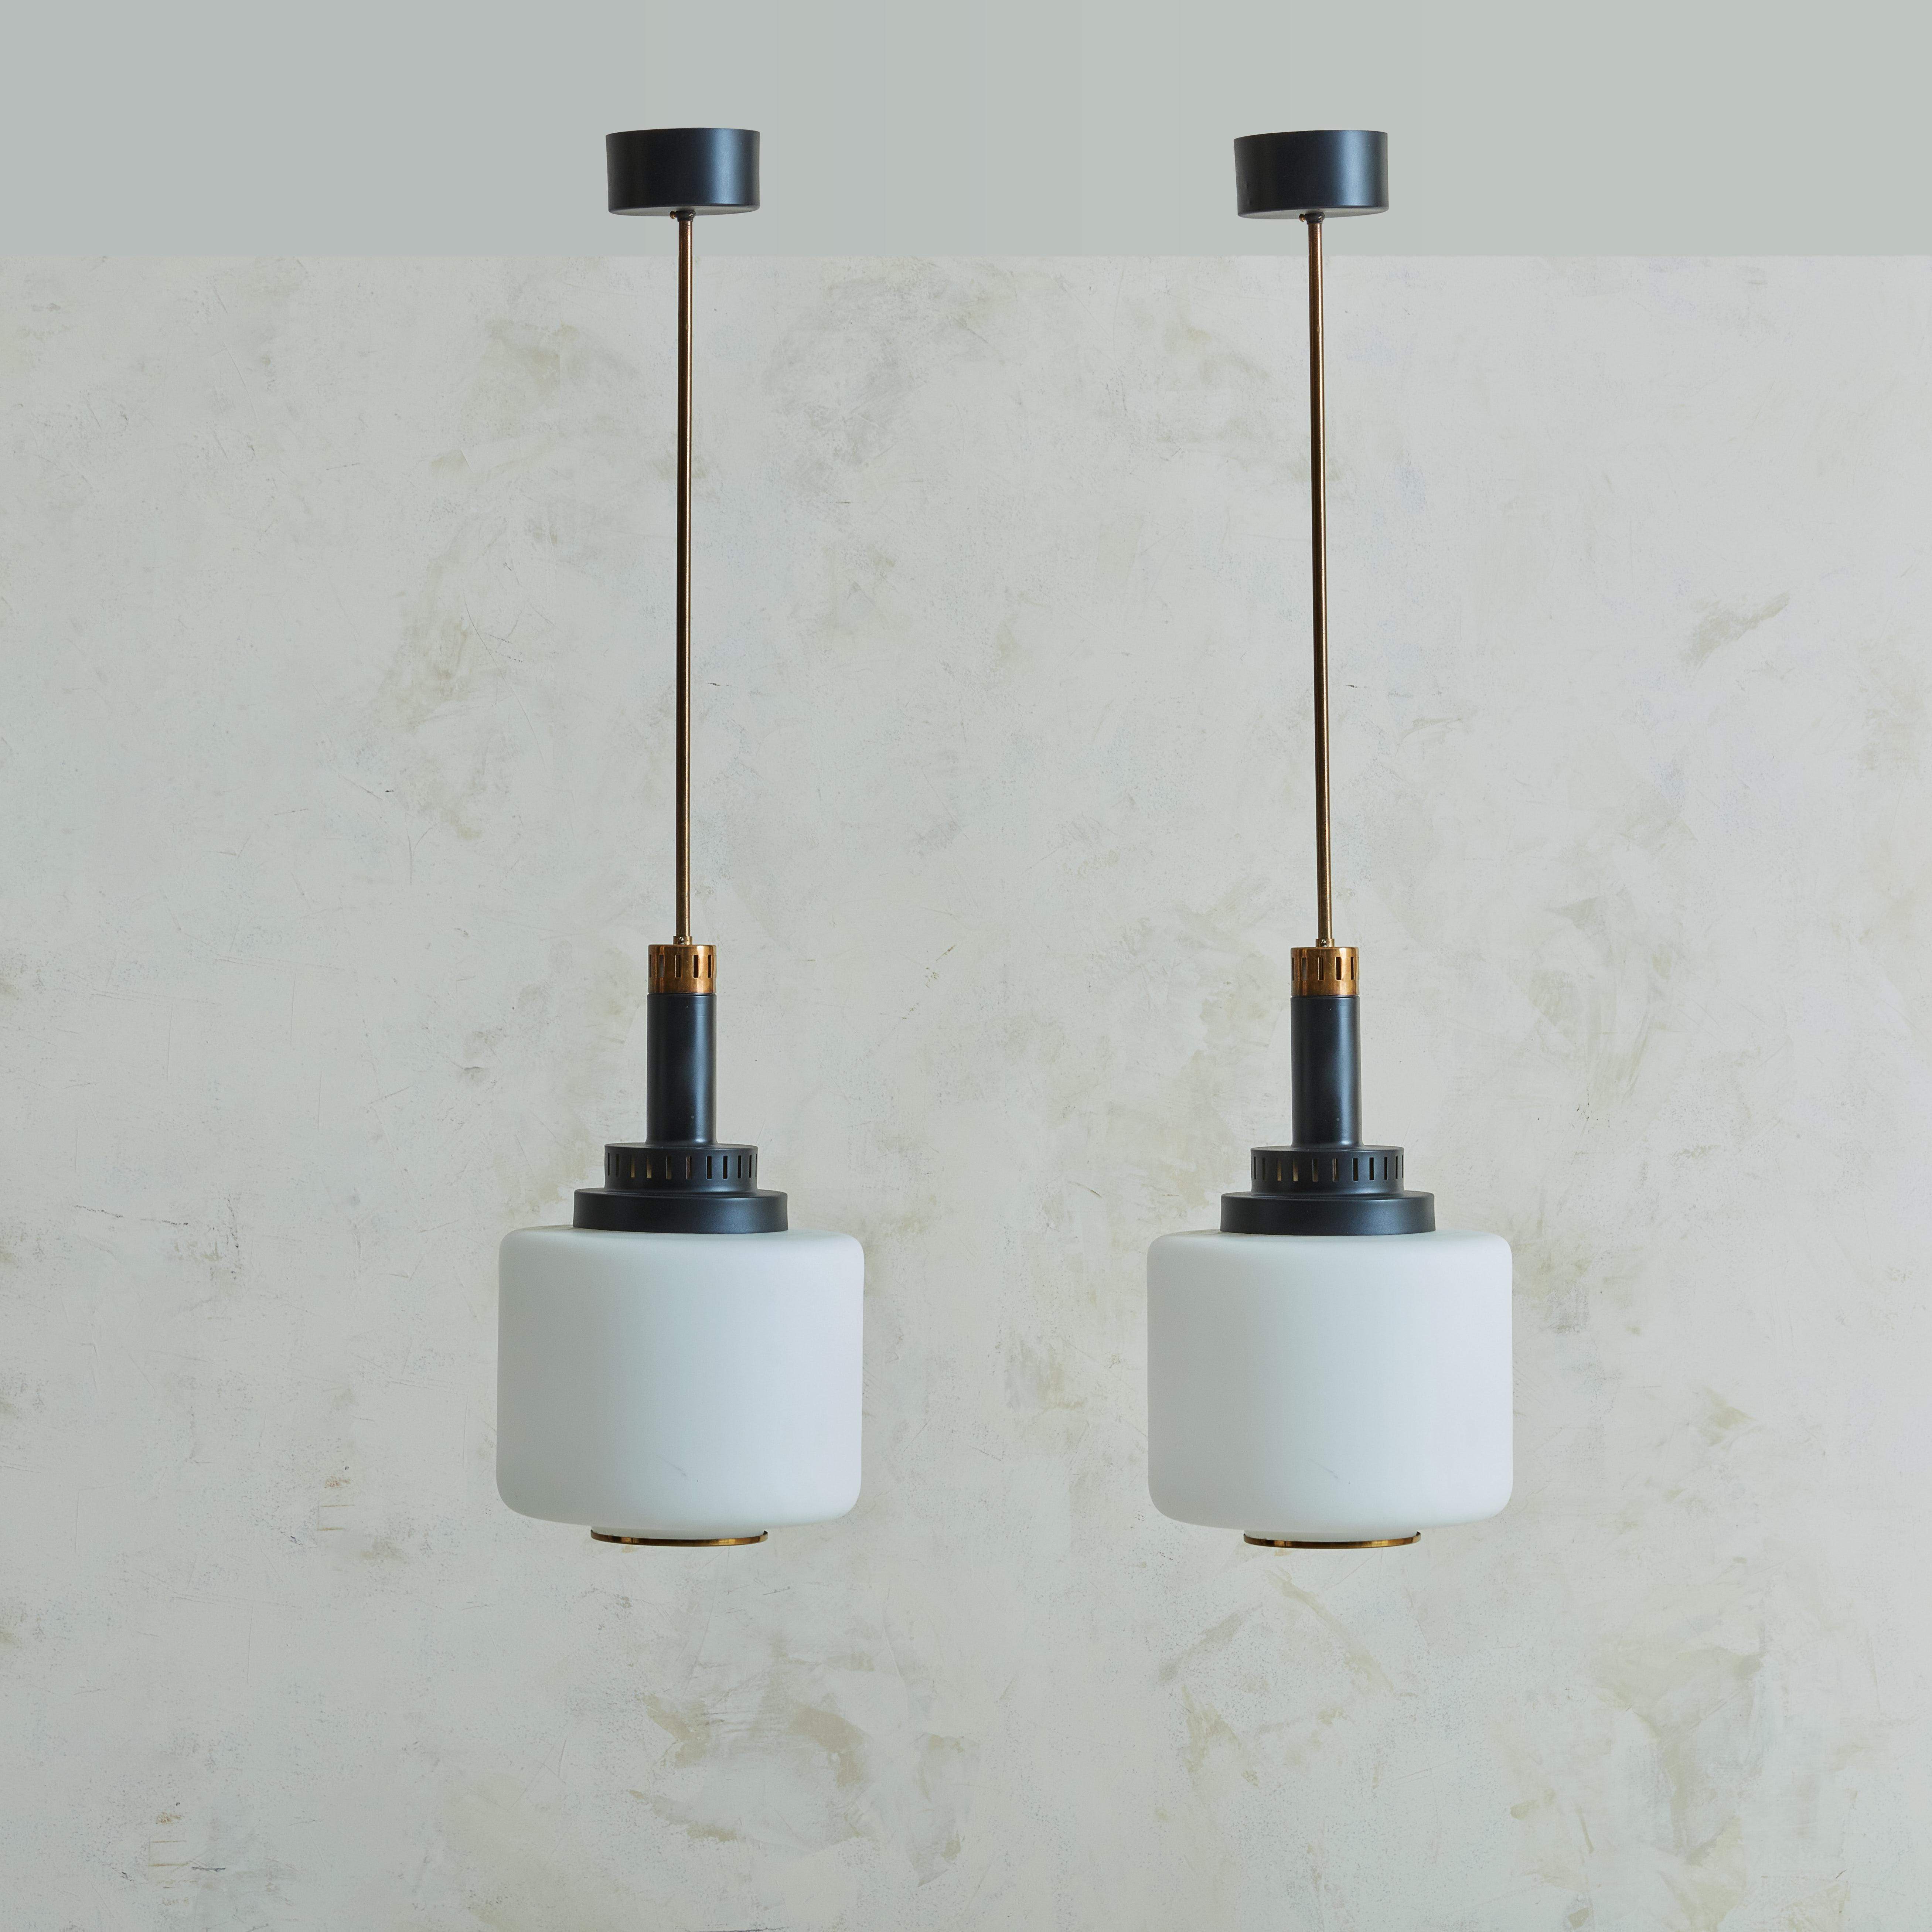 A pair of 1960s pendant lights by Stilnovo. This pair of beauties made by the combination of brass, lacquered metal and opaline glass are a perfect example of the mid-century productions this famous brand did in collaboration with many famous